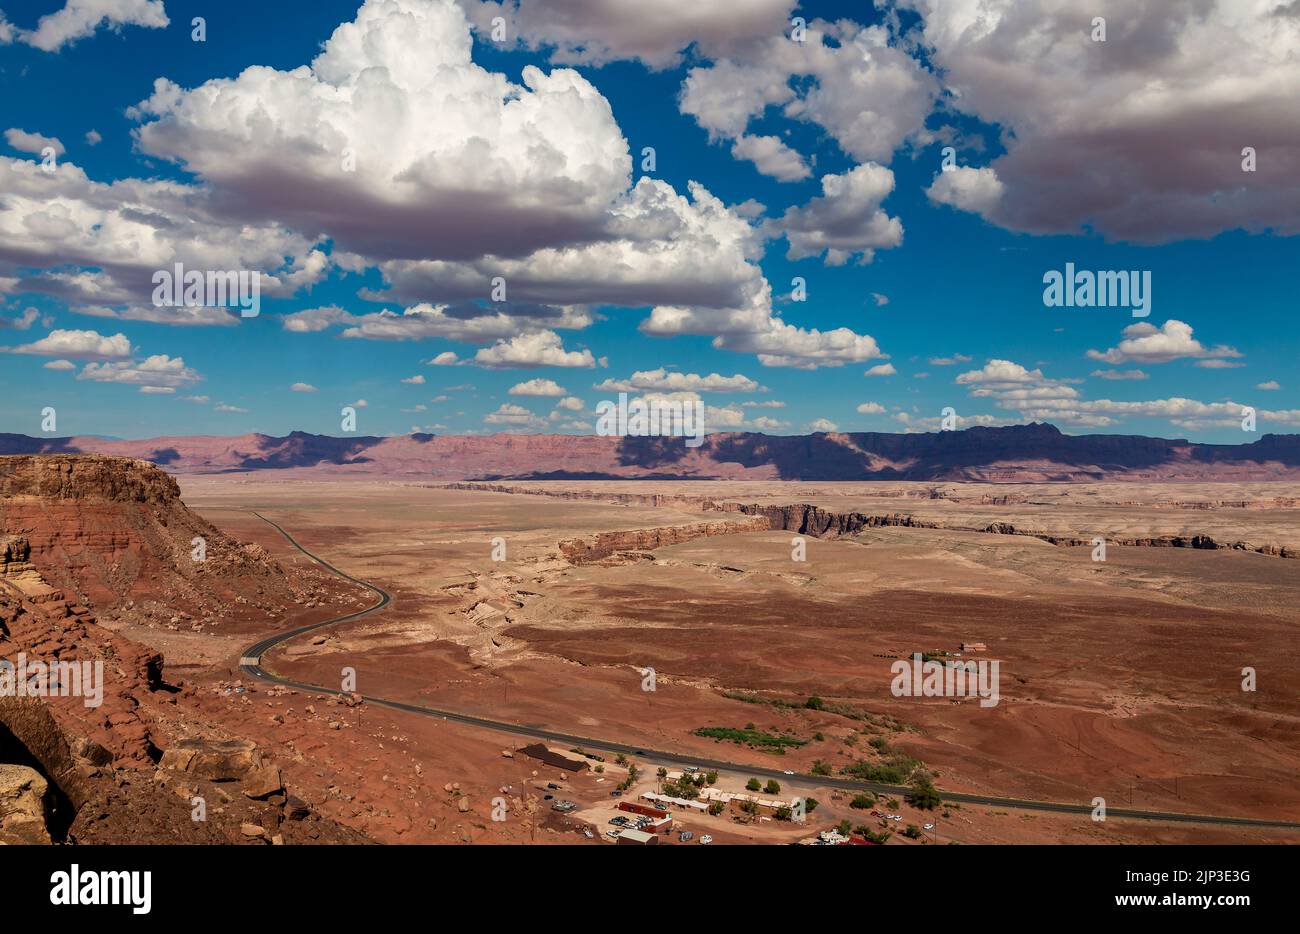 Marble Canyon Arizona With Desert Highway 89a In View Stock Photo